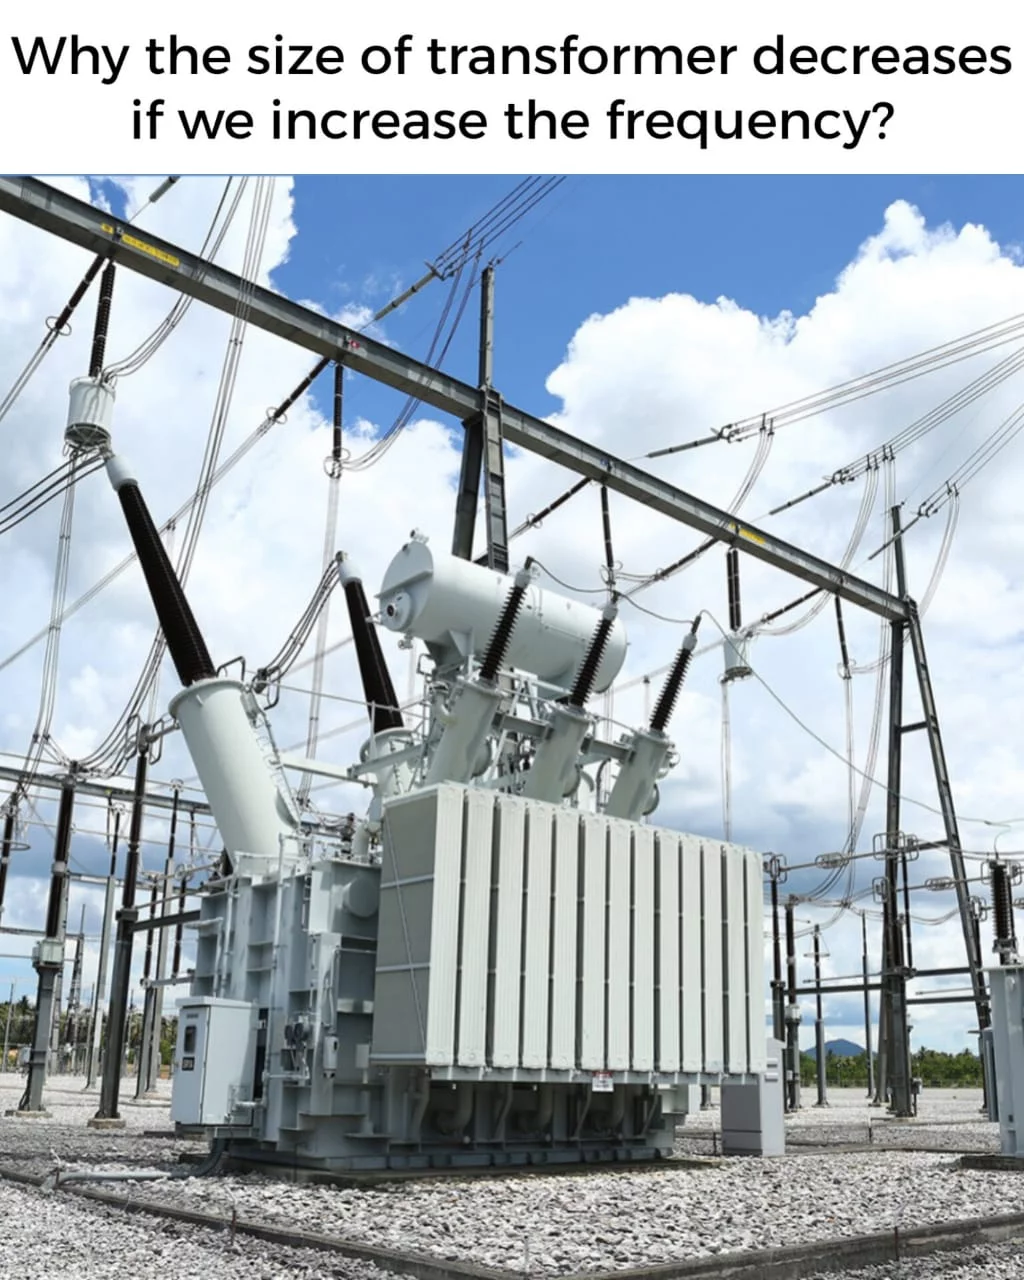 Why size of transformers decrease if we increase frequency?